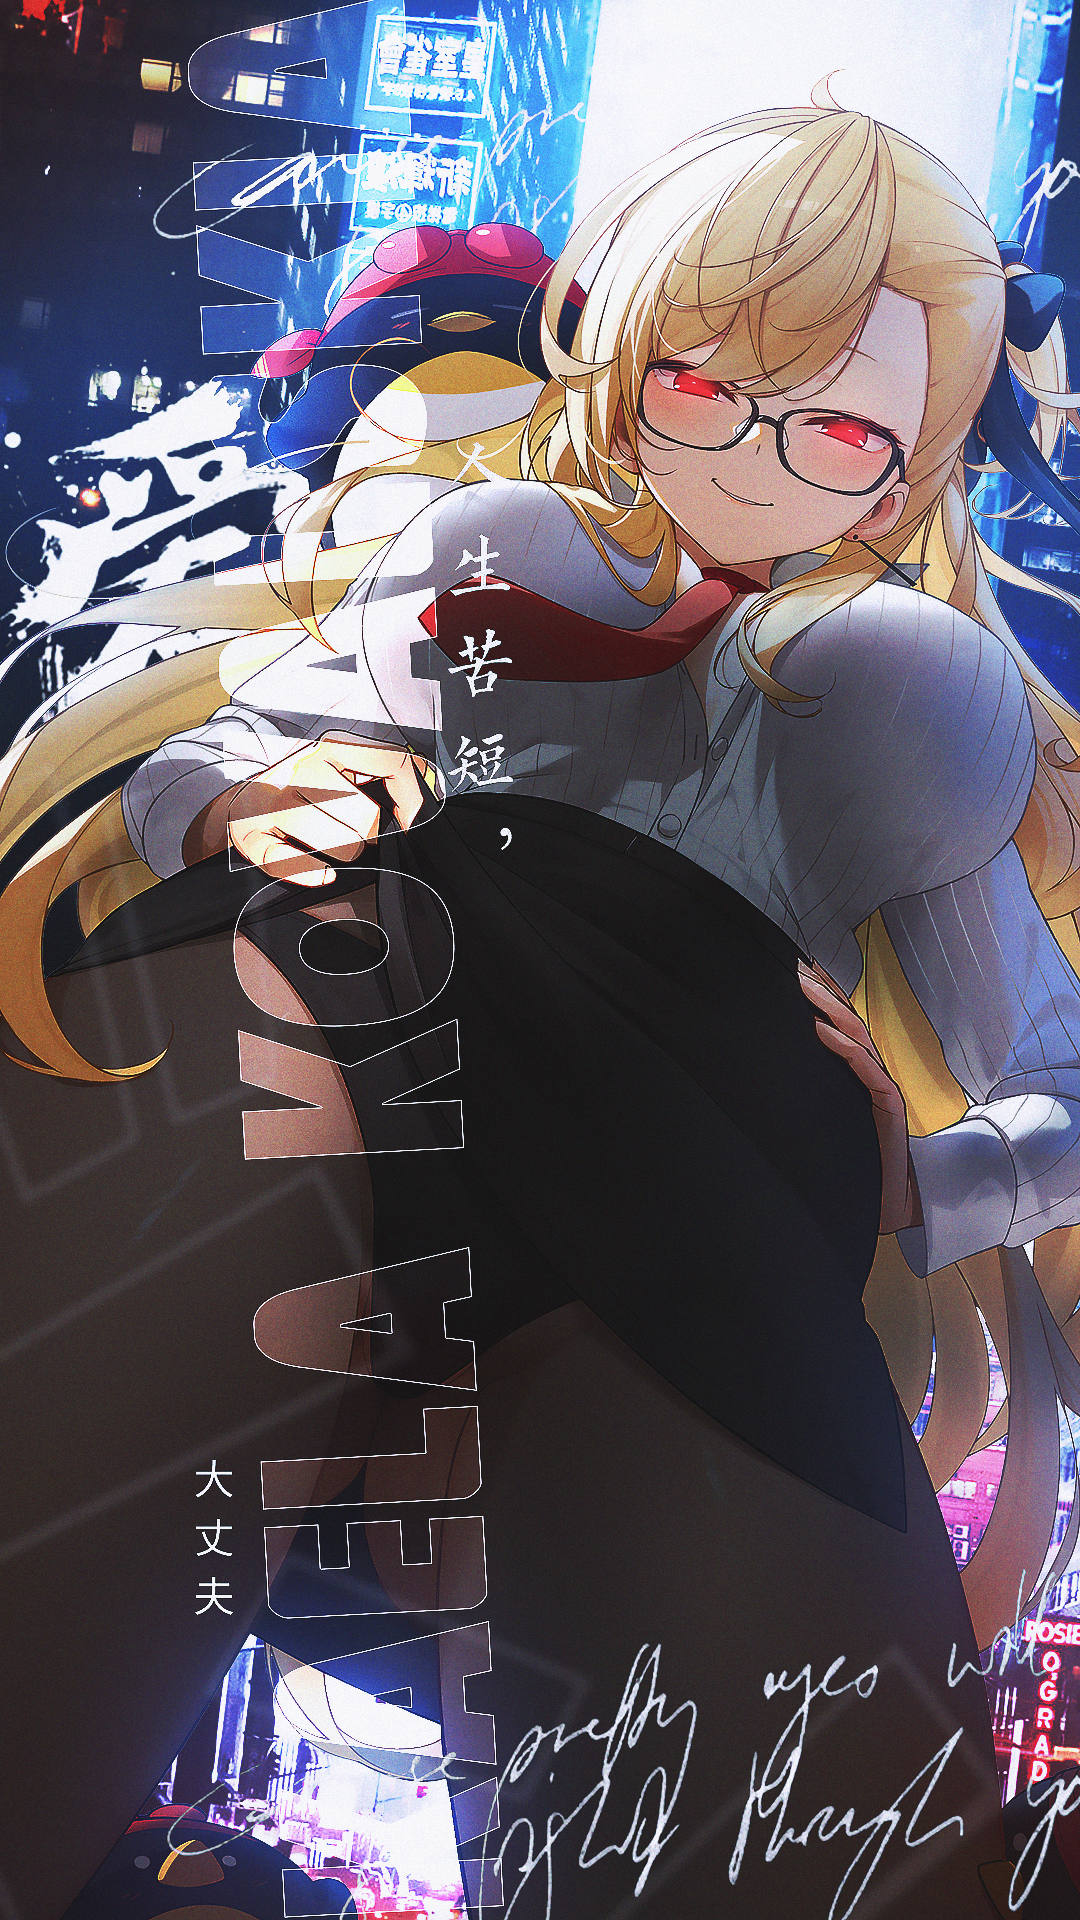 Anime 1080x1920 anime big boobs hanging boobs street Japan anime girls Kaela Kovalskia Youtuber Hololive Hololive Indonesia Virtual Youtuber standing portrait display long hair glasses women with glasses GreatoDoggo smiling closed mouth red eyes blonde low-angle edit lifting shirt upskirt pantyhose